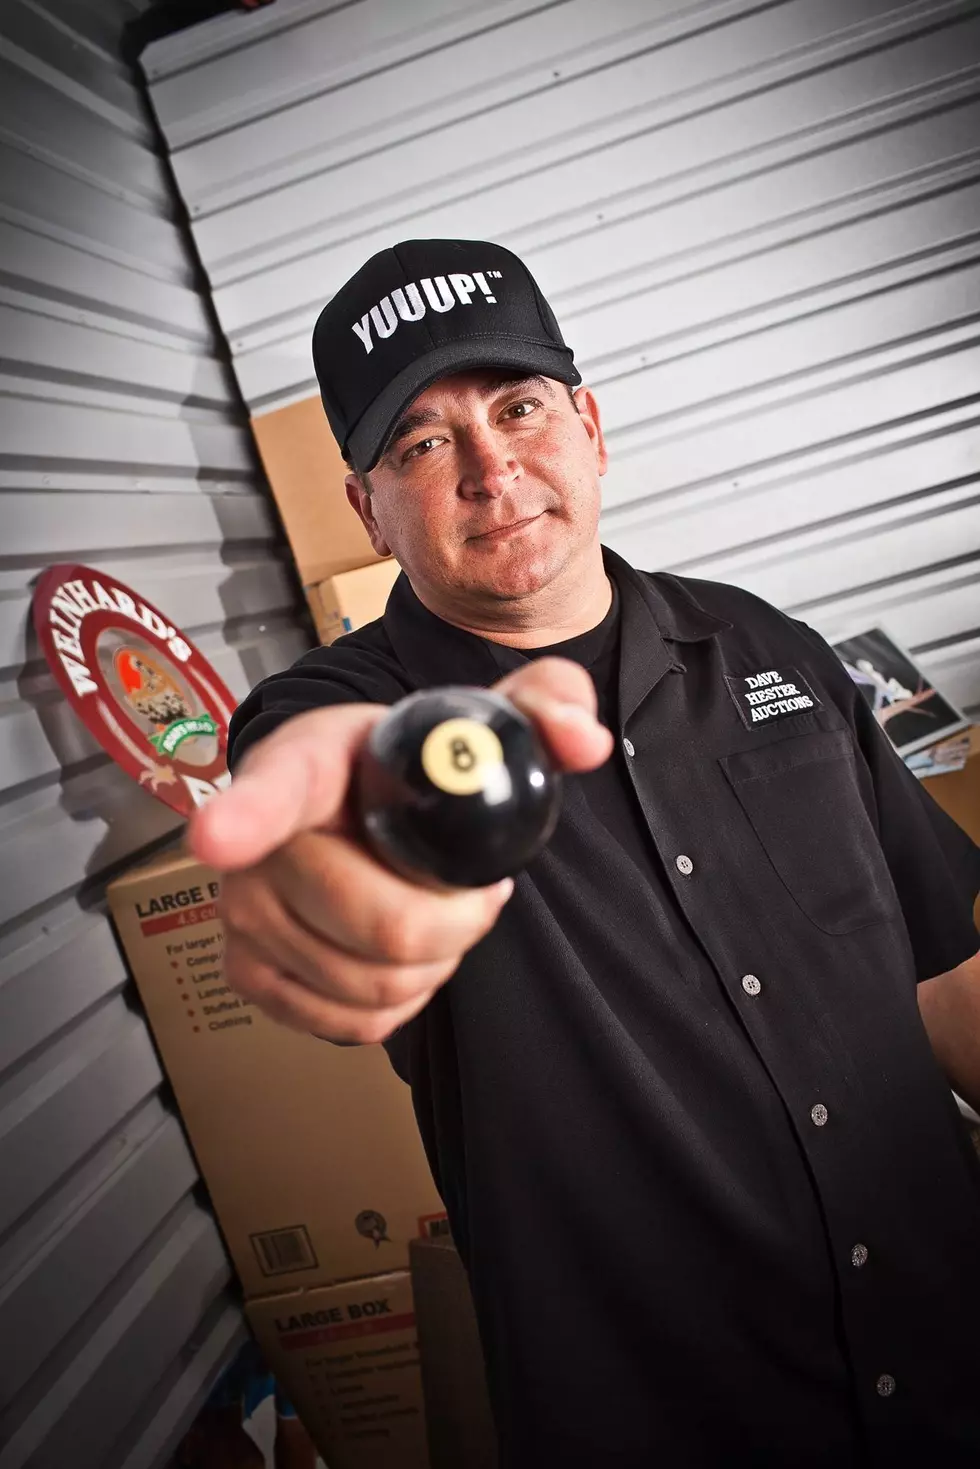 2019 Special Guest Announced: Dave Hester from Storage Wars